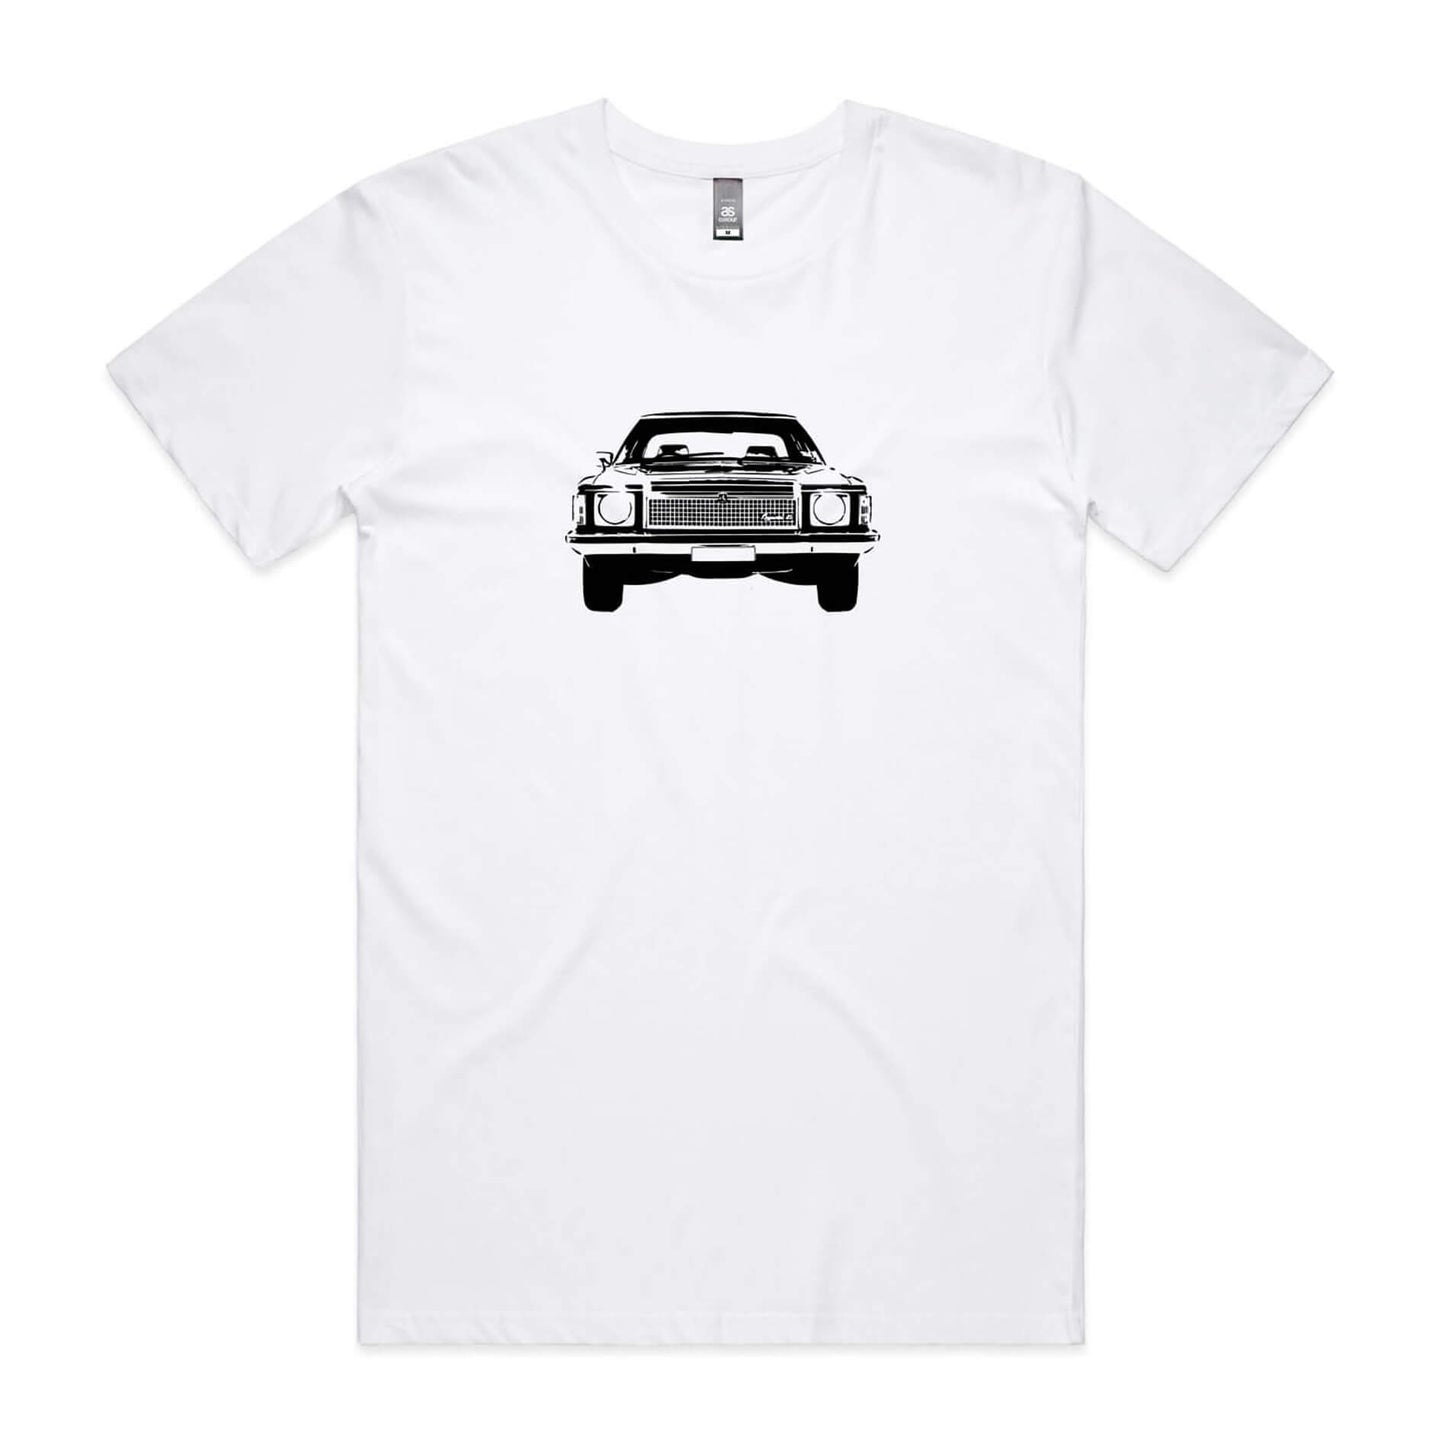 Holden HZ Kingswood t-shirt in white with black car silhouette graphic